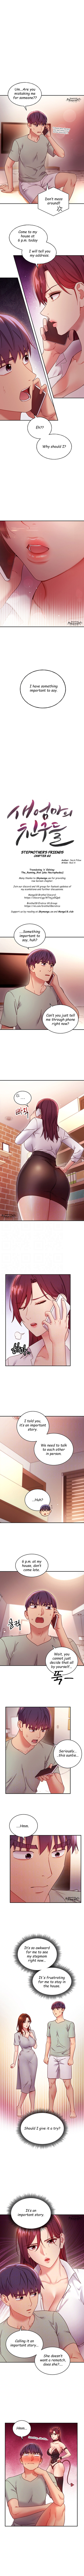 Panel Image 1 for chapter 62 of manhwa Stepmother